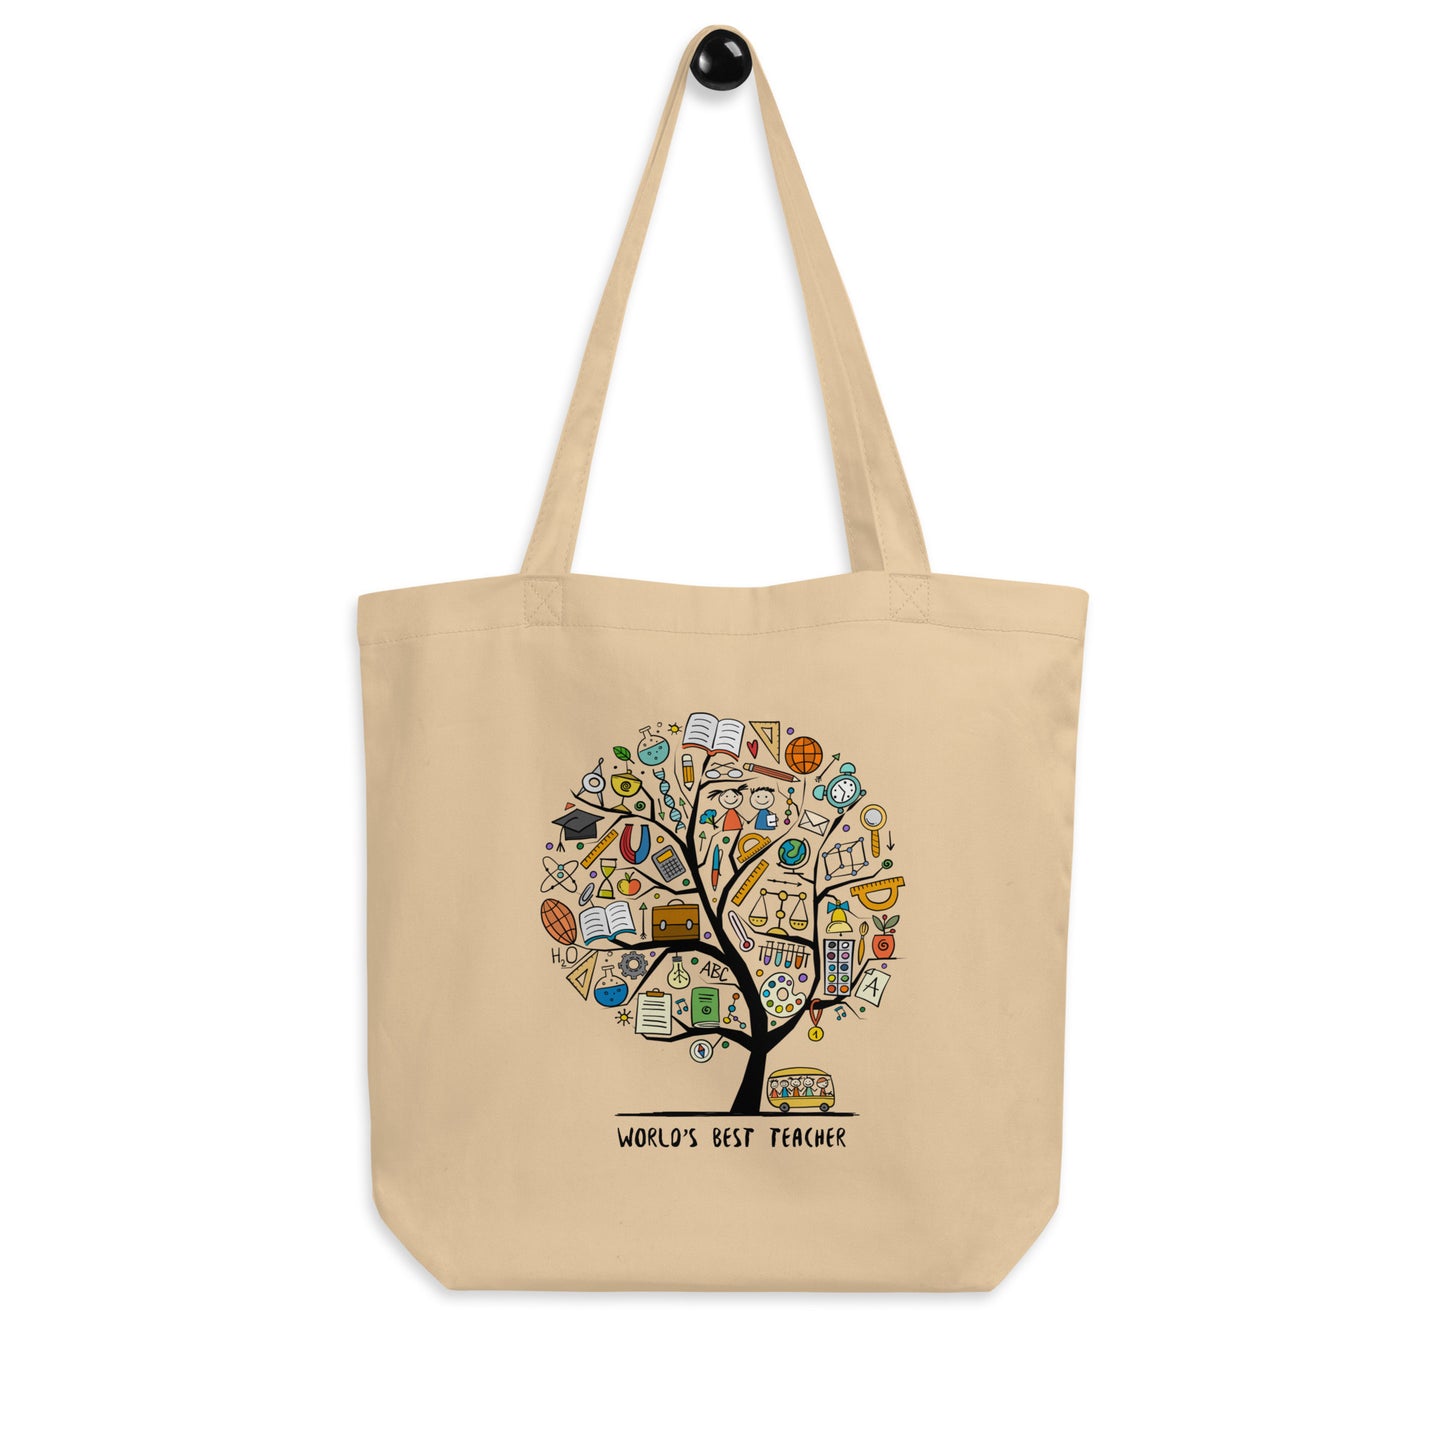 Personalized Eco Tote Bag with Funny School Concept Tree Print kudrylab